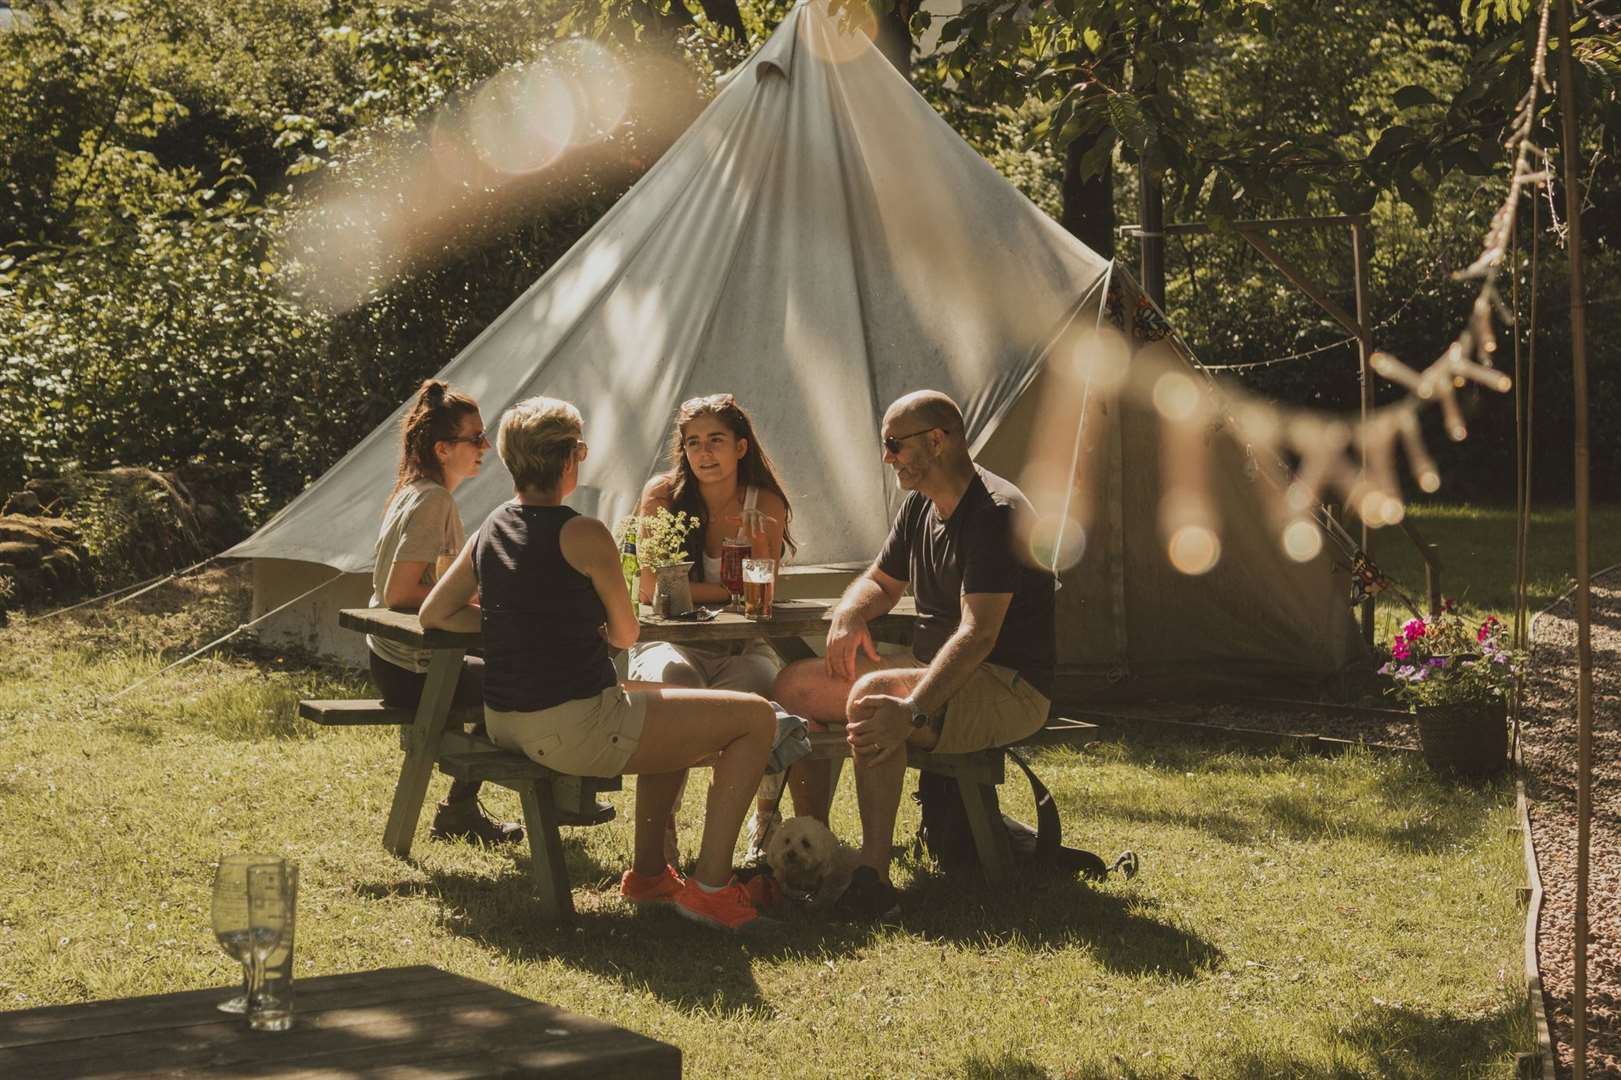 Will you go glamping this summer?